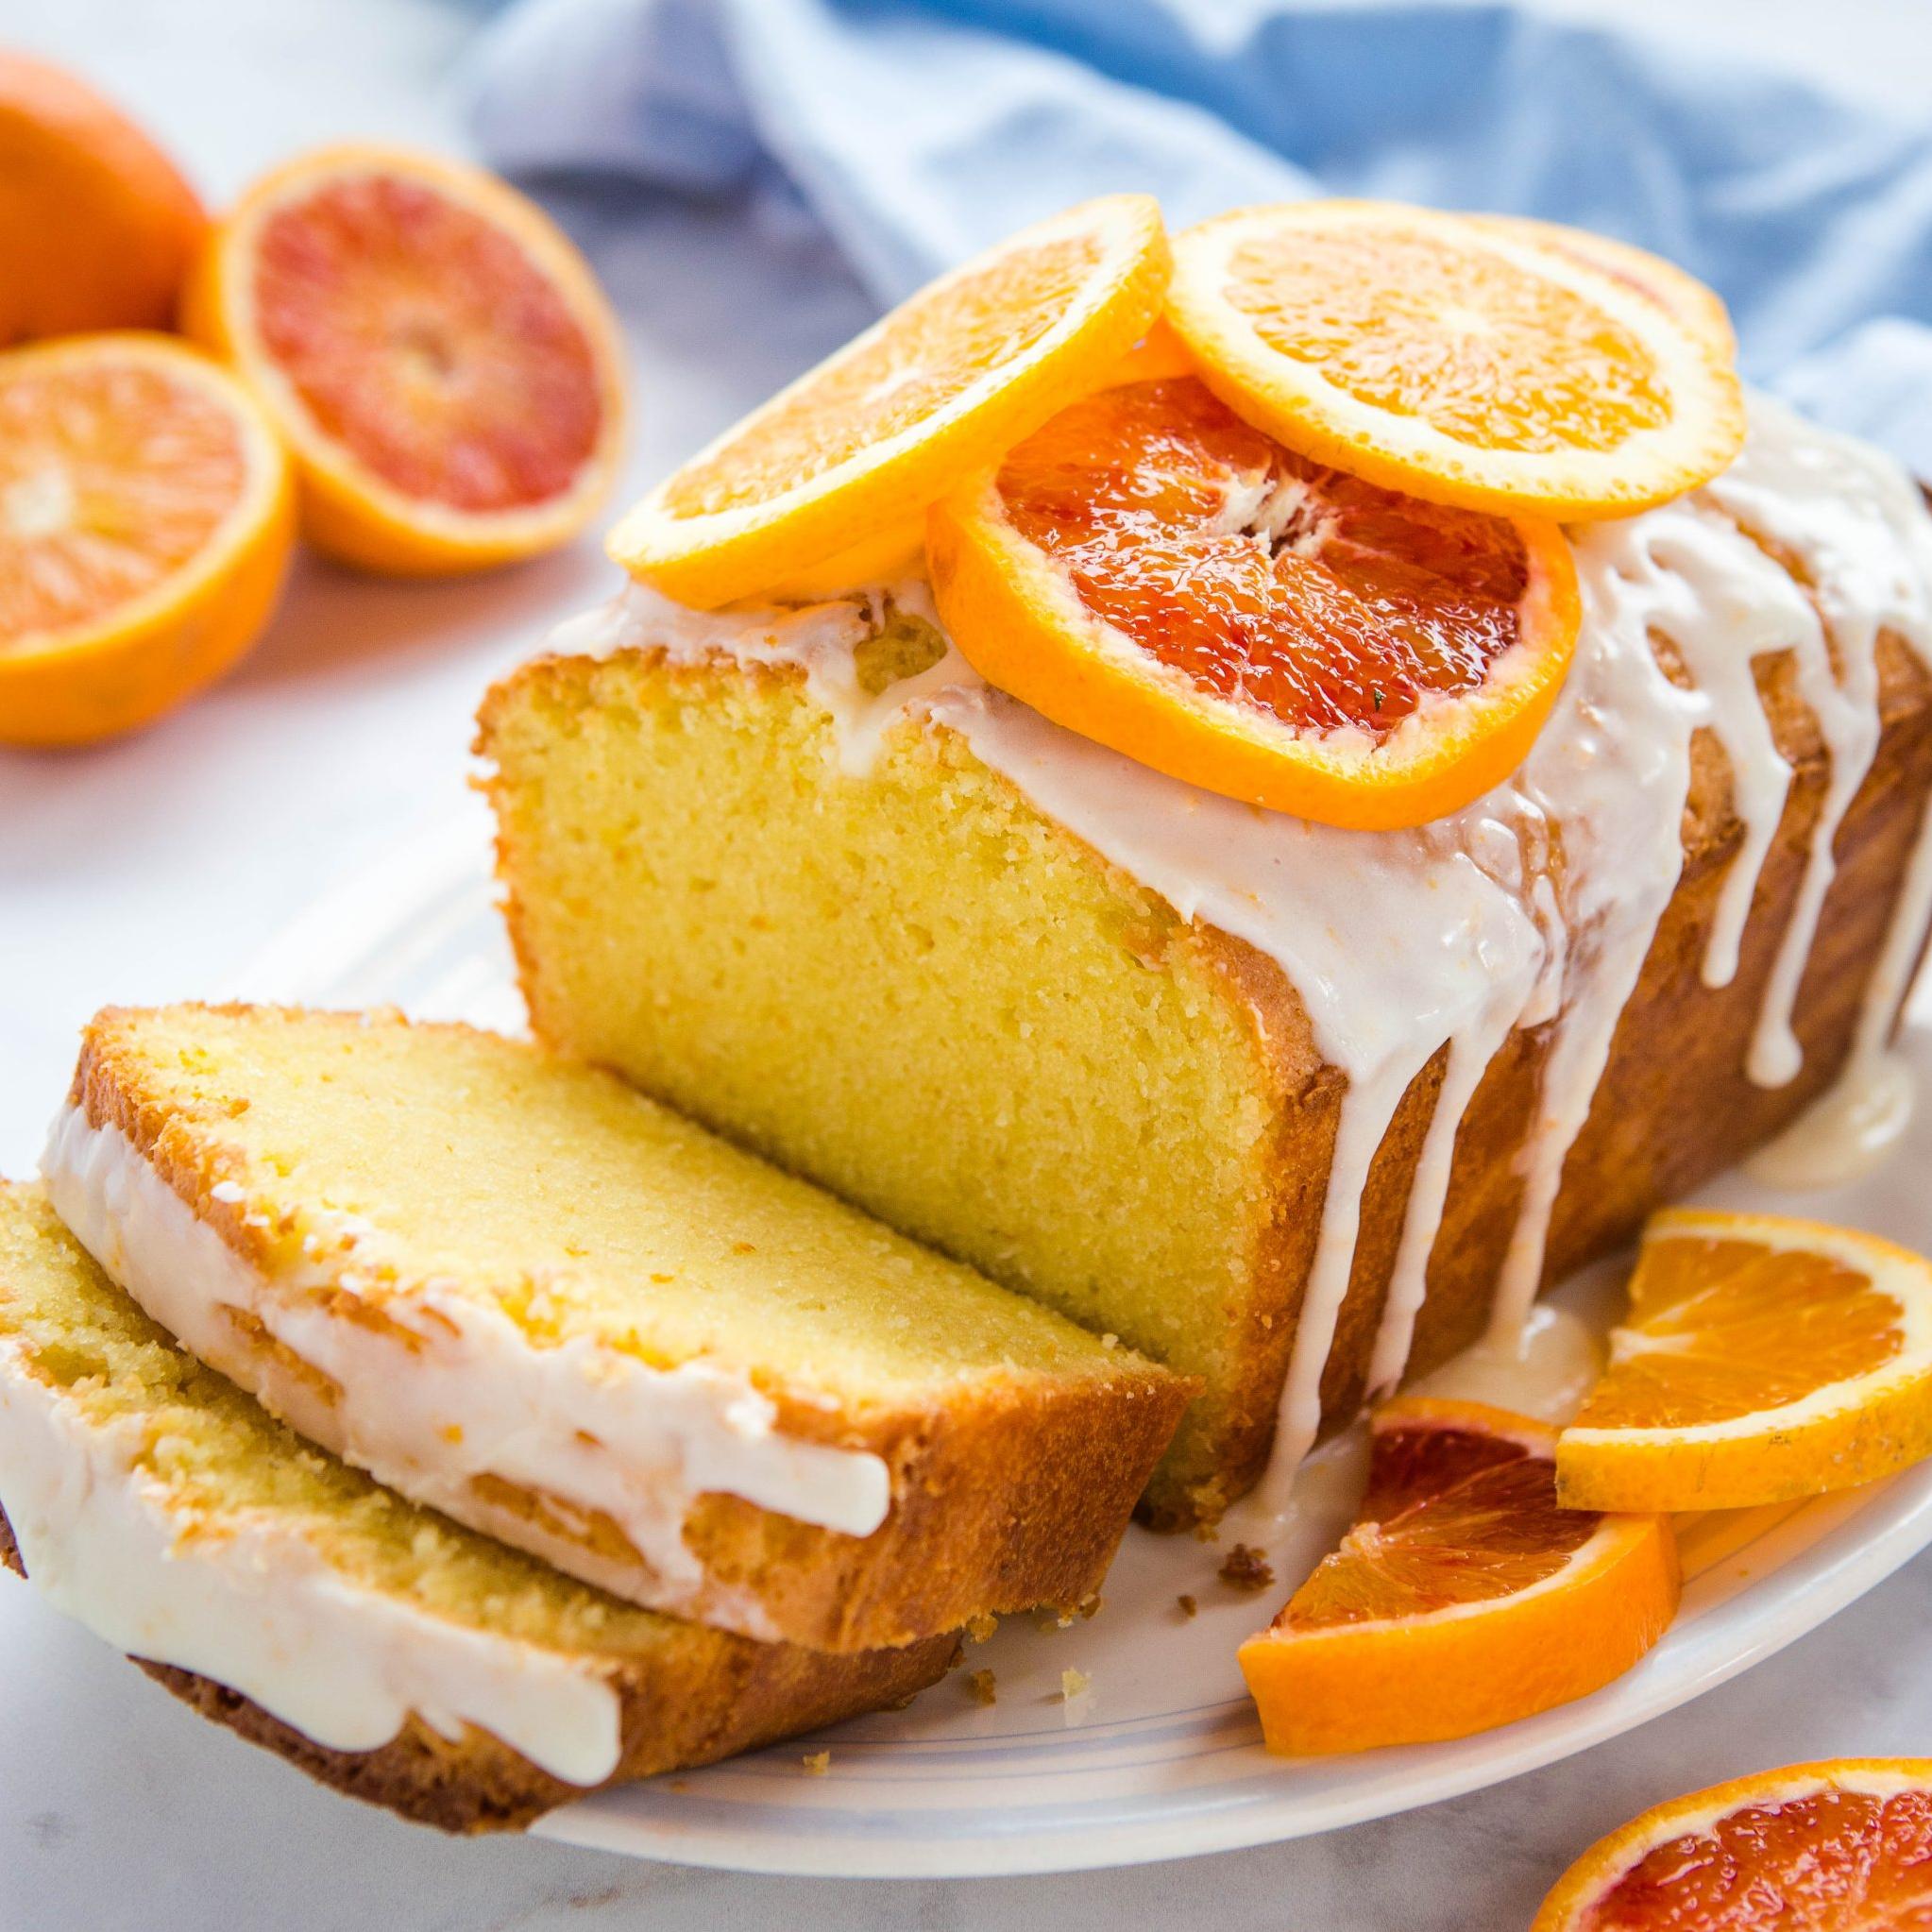  Impress your guests with the stunning texture and bright orange color of this pound cake.